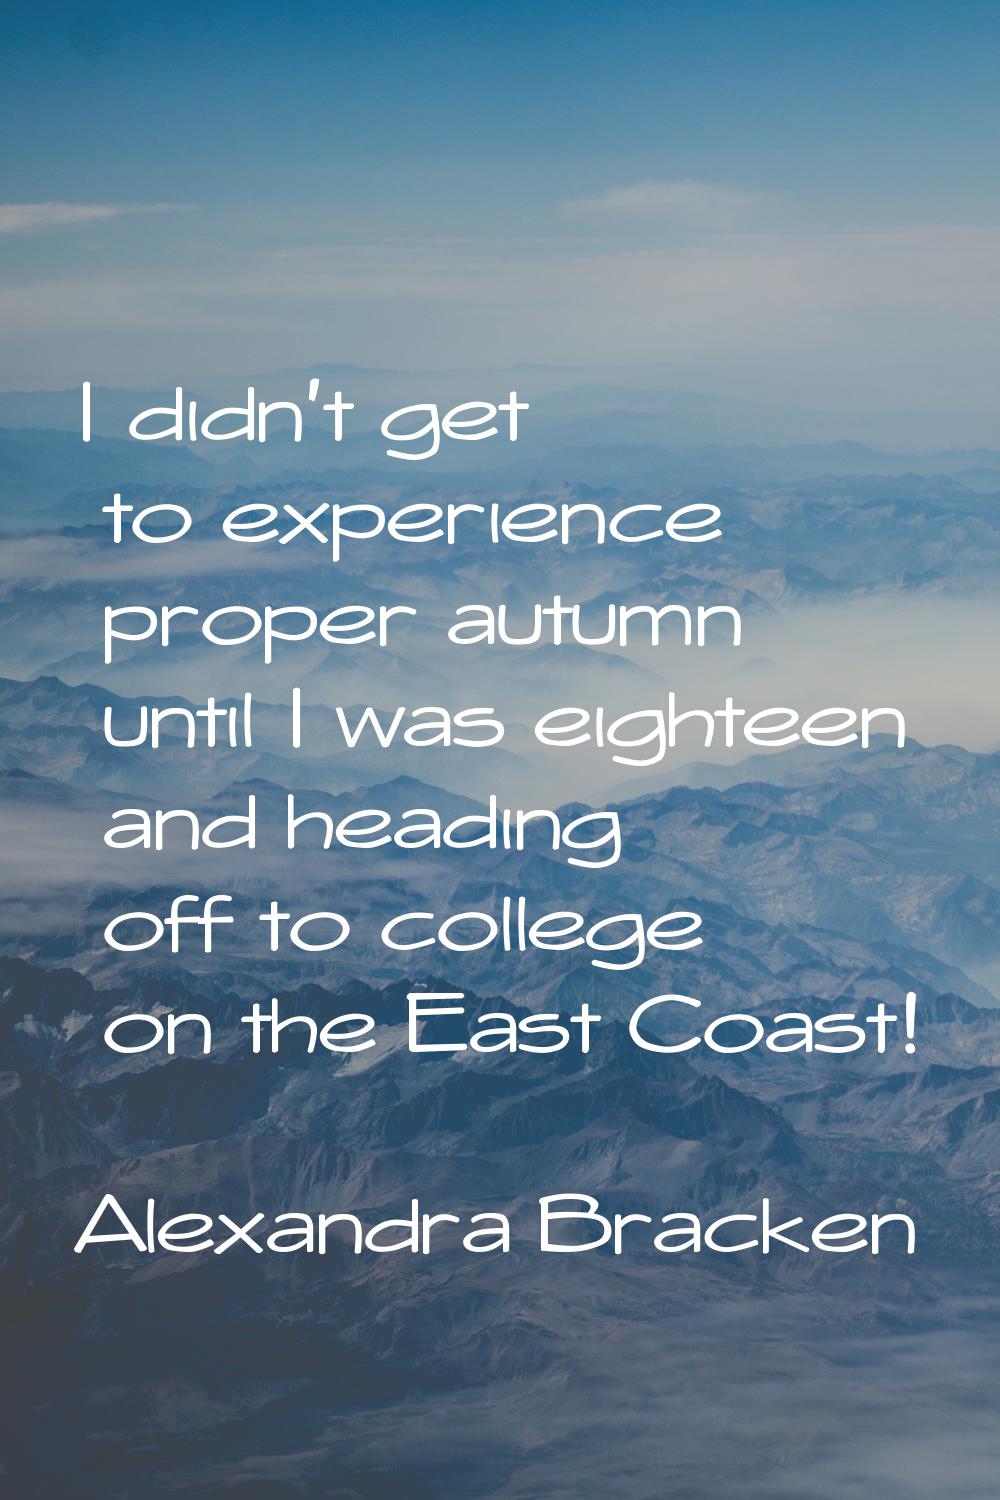 I didn't get to experience proper autumn until I was eighteen and heading off to college on the Eas